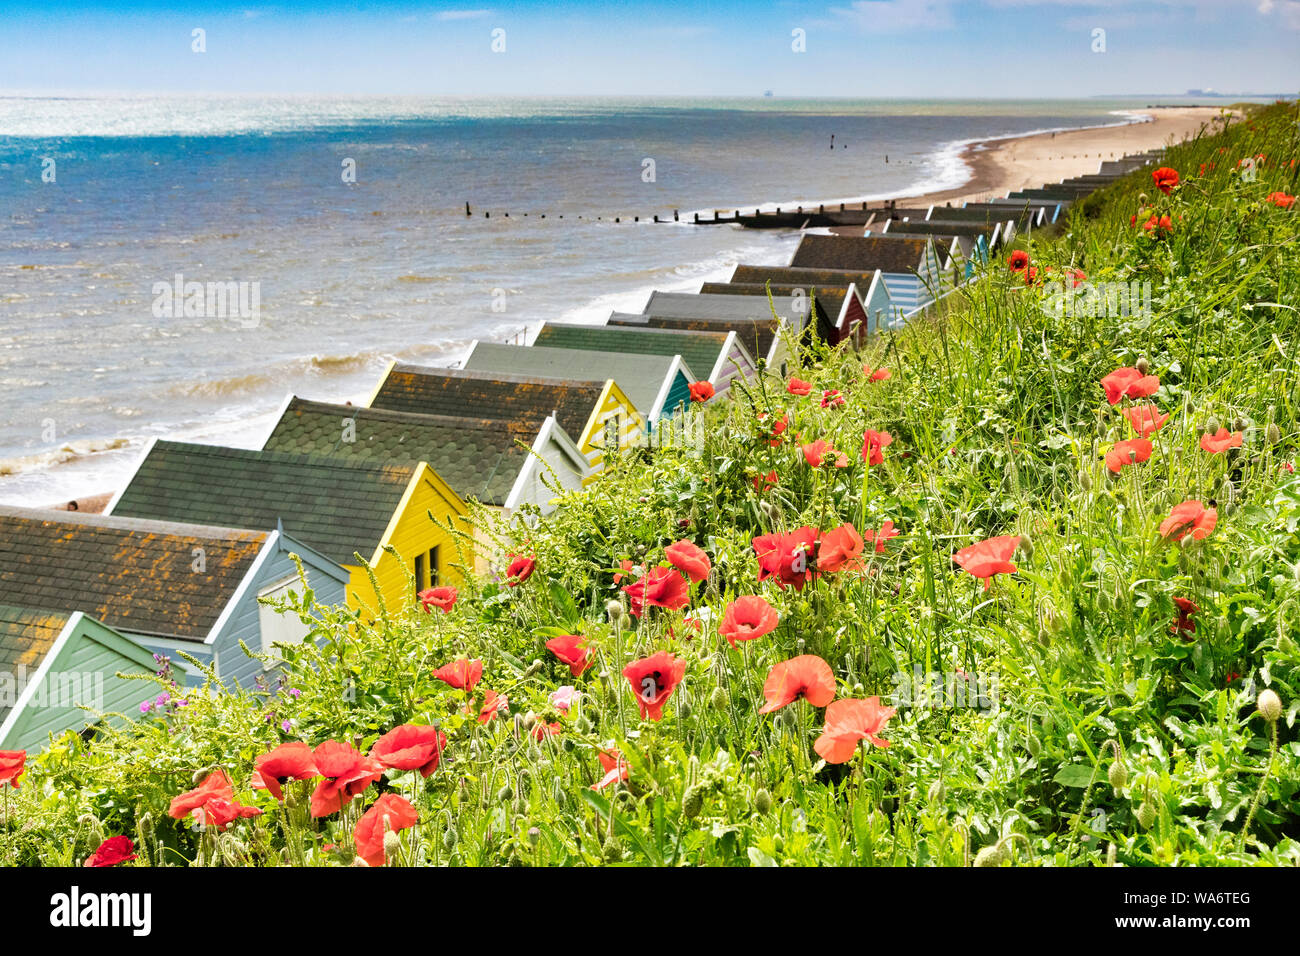 Red poppies amongst the grasses on the cliff at Southwold, Suffolk, with beach huts below. Stock Photo